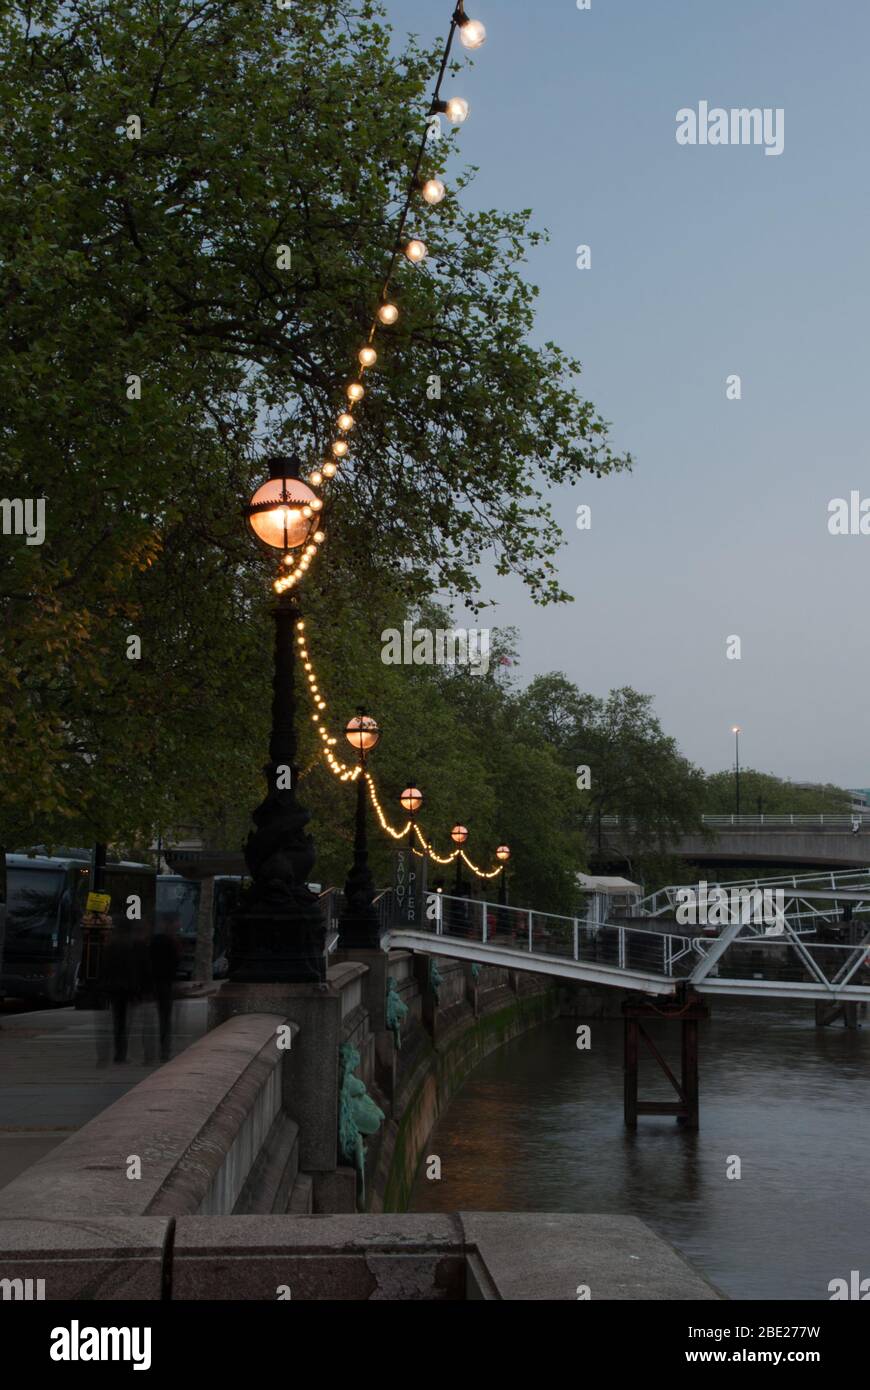 String Lights RiversidePath Victoria Embankment Place Charing Cross Station, Londres WC2N 5DR Foto de stock